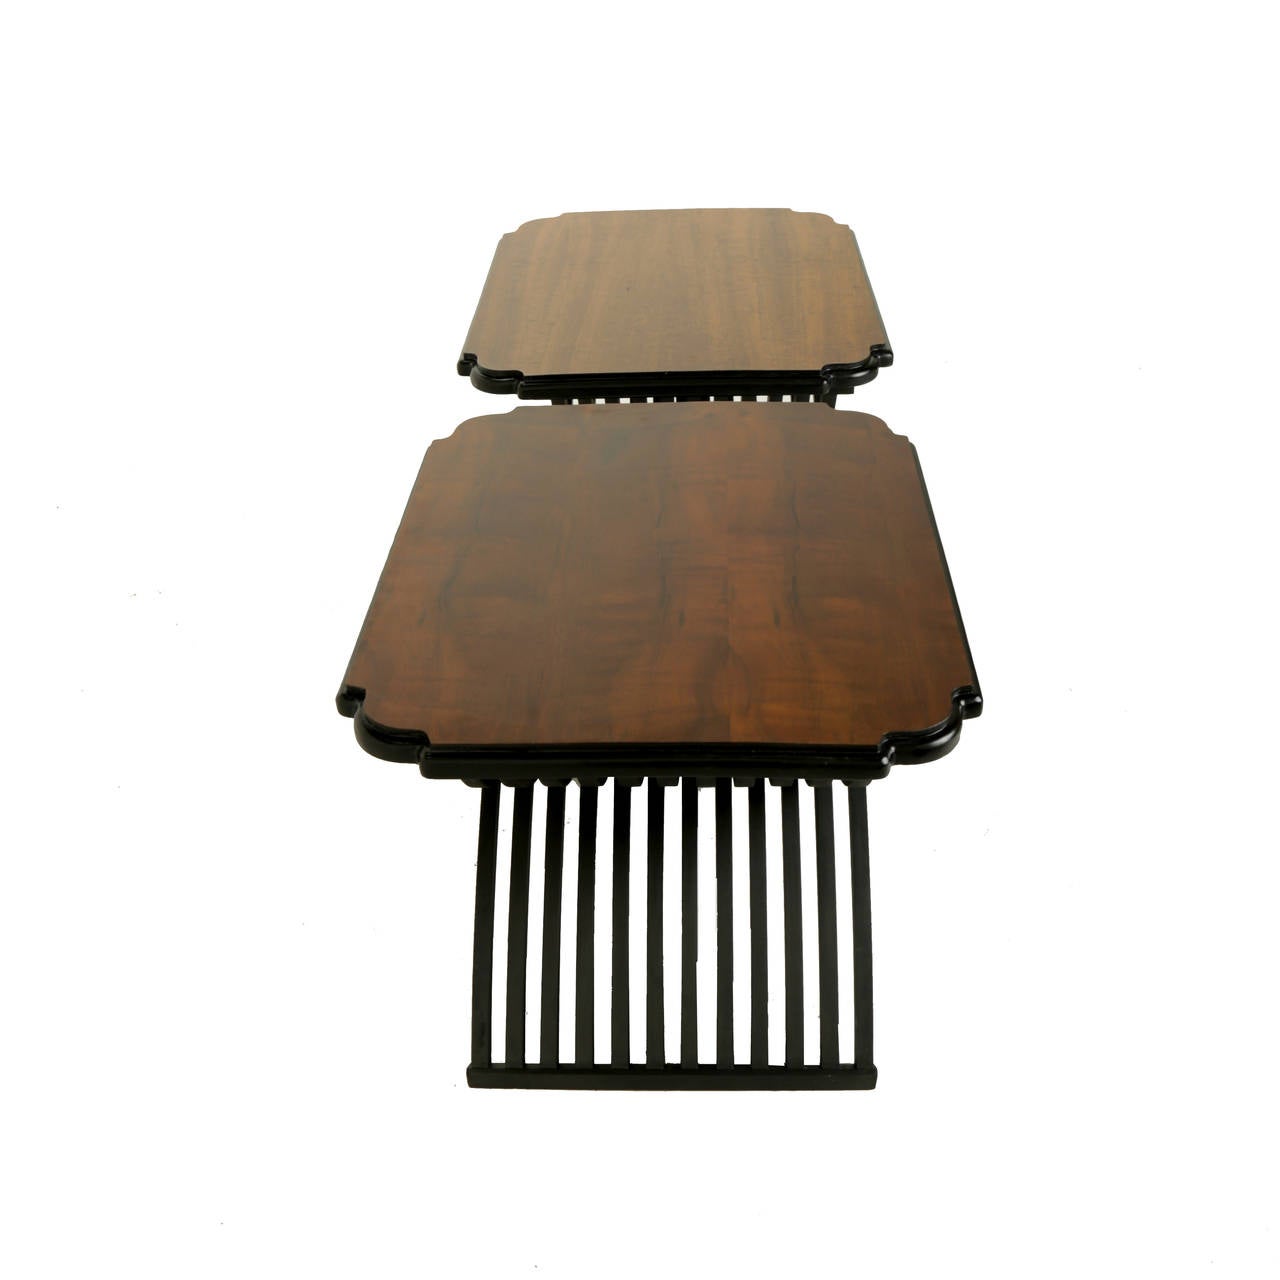 American Mid-Century Modern Mechanized Sculptural Side Tables For Sale